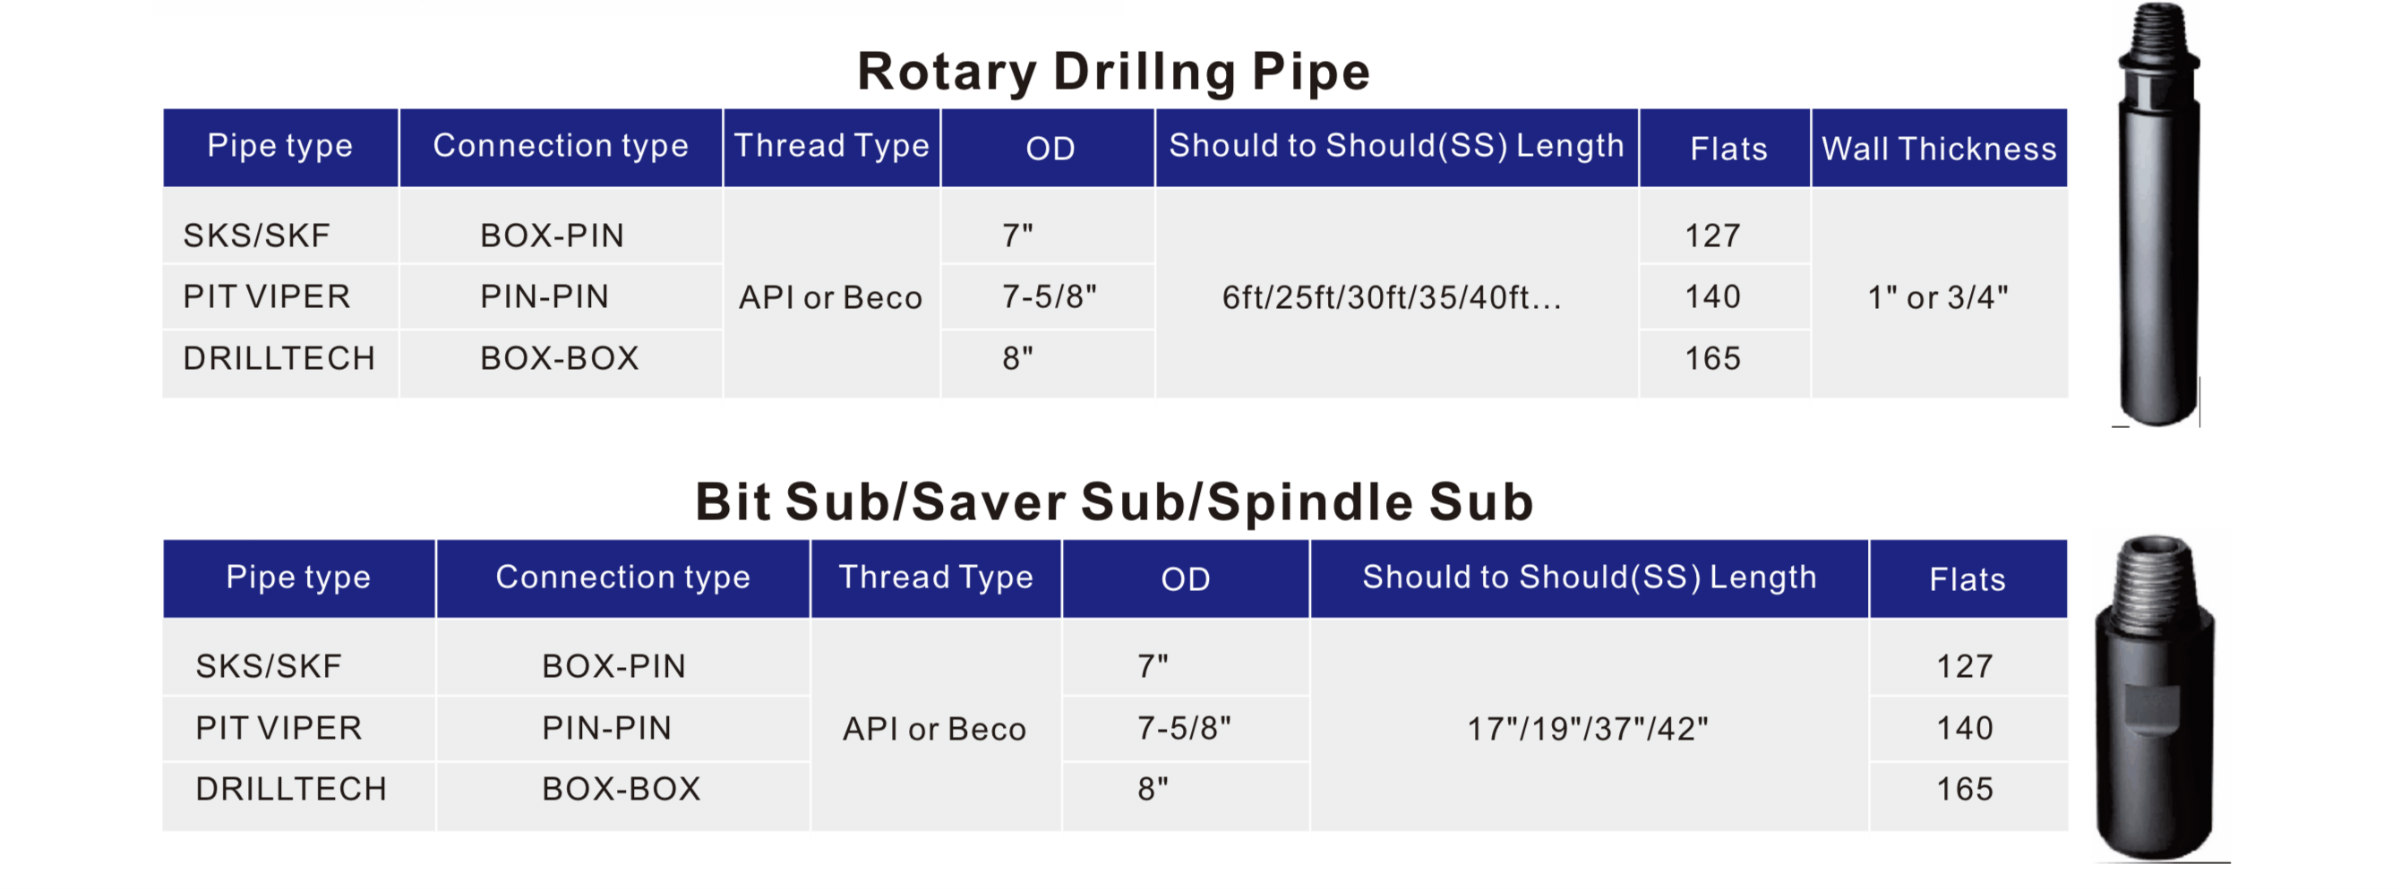 Rotary Drilling Pipe and Subs